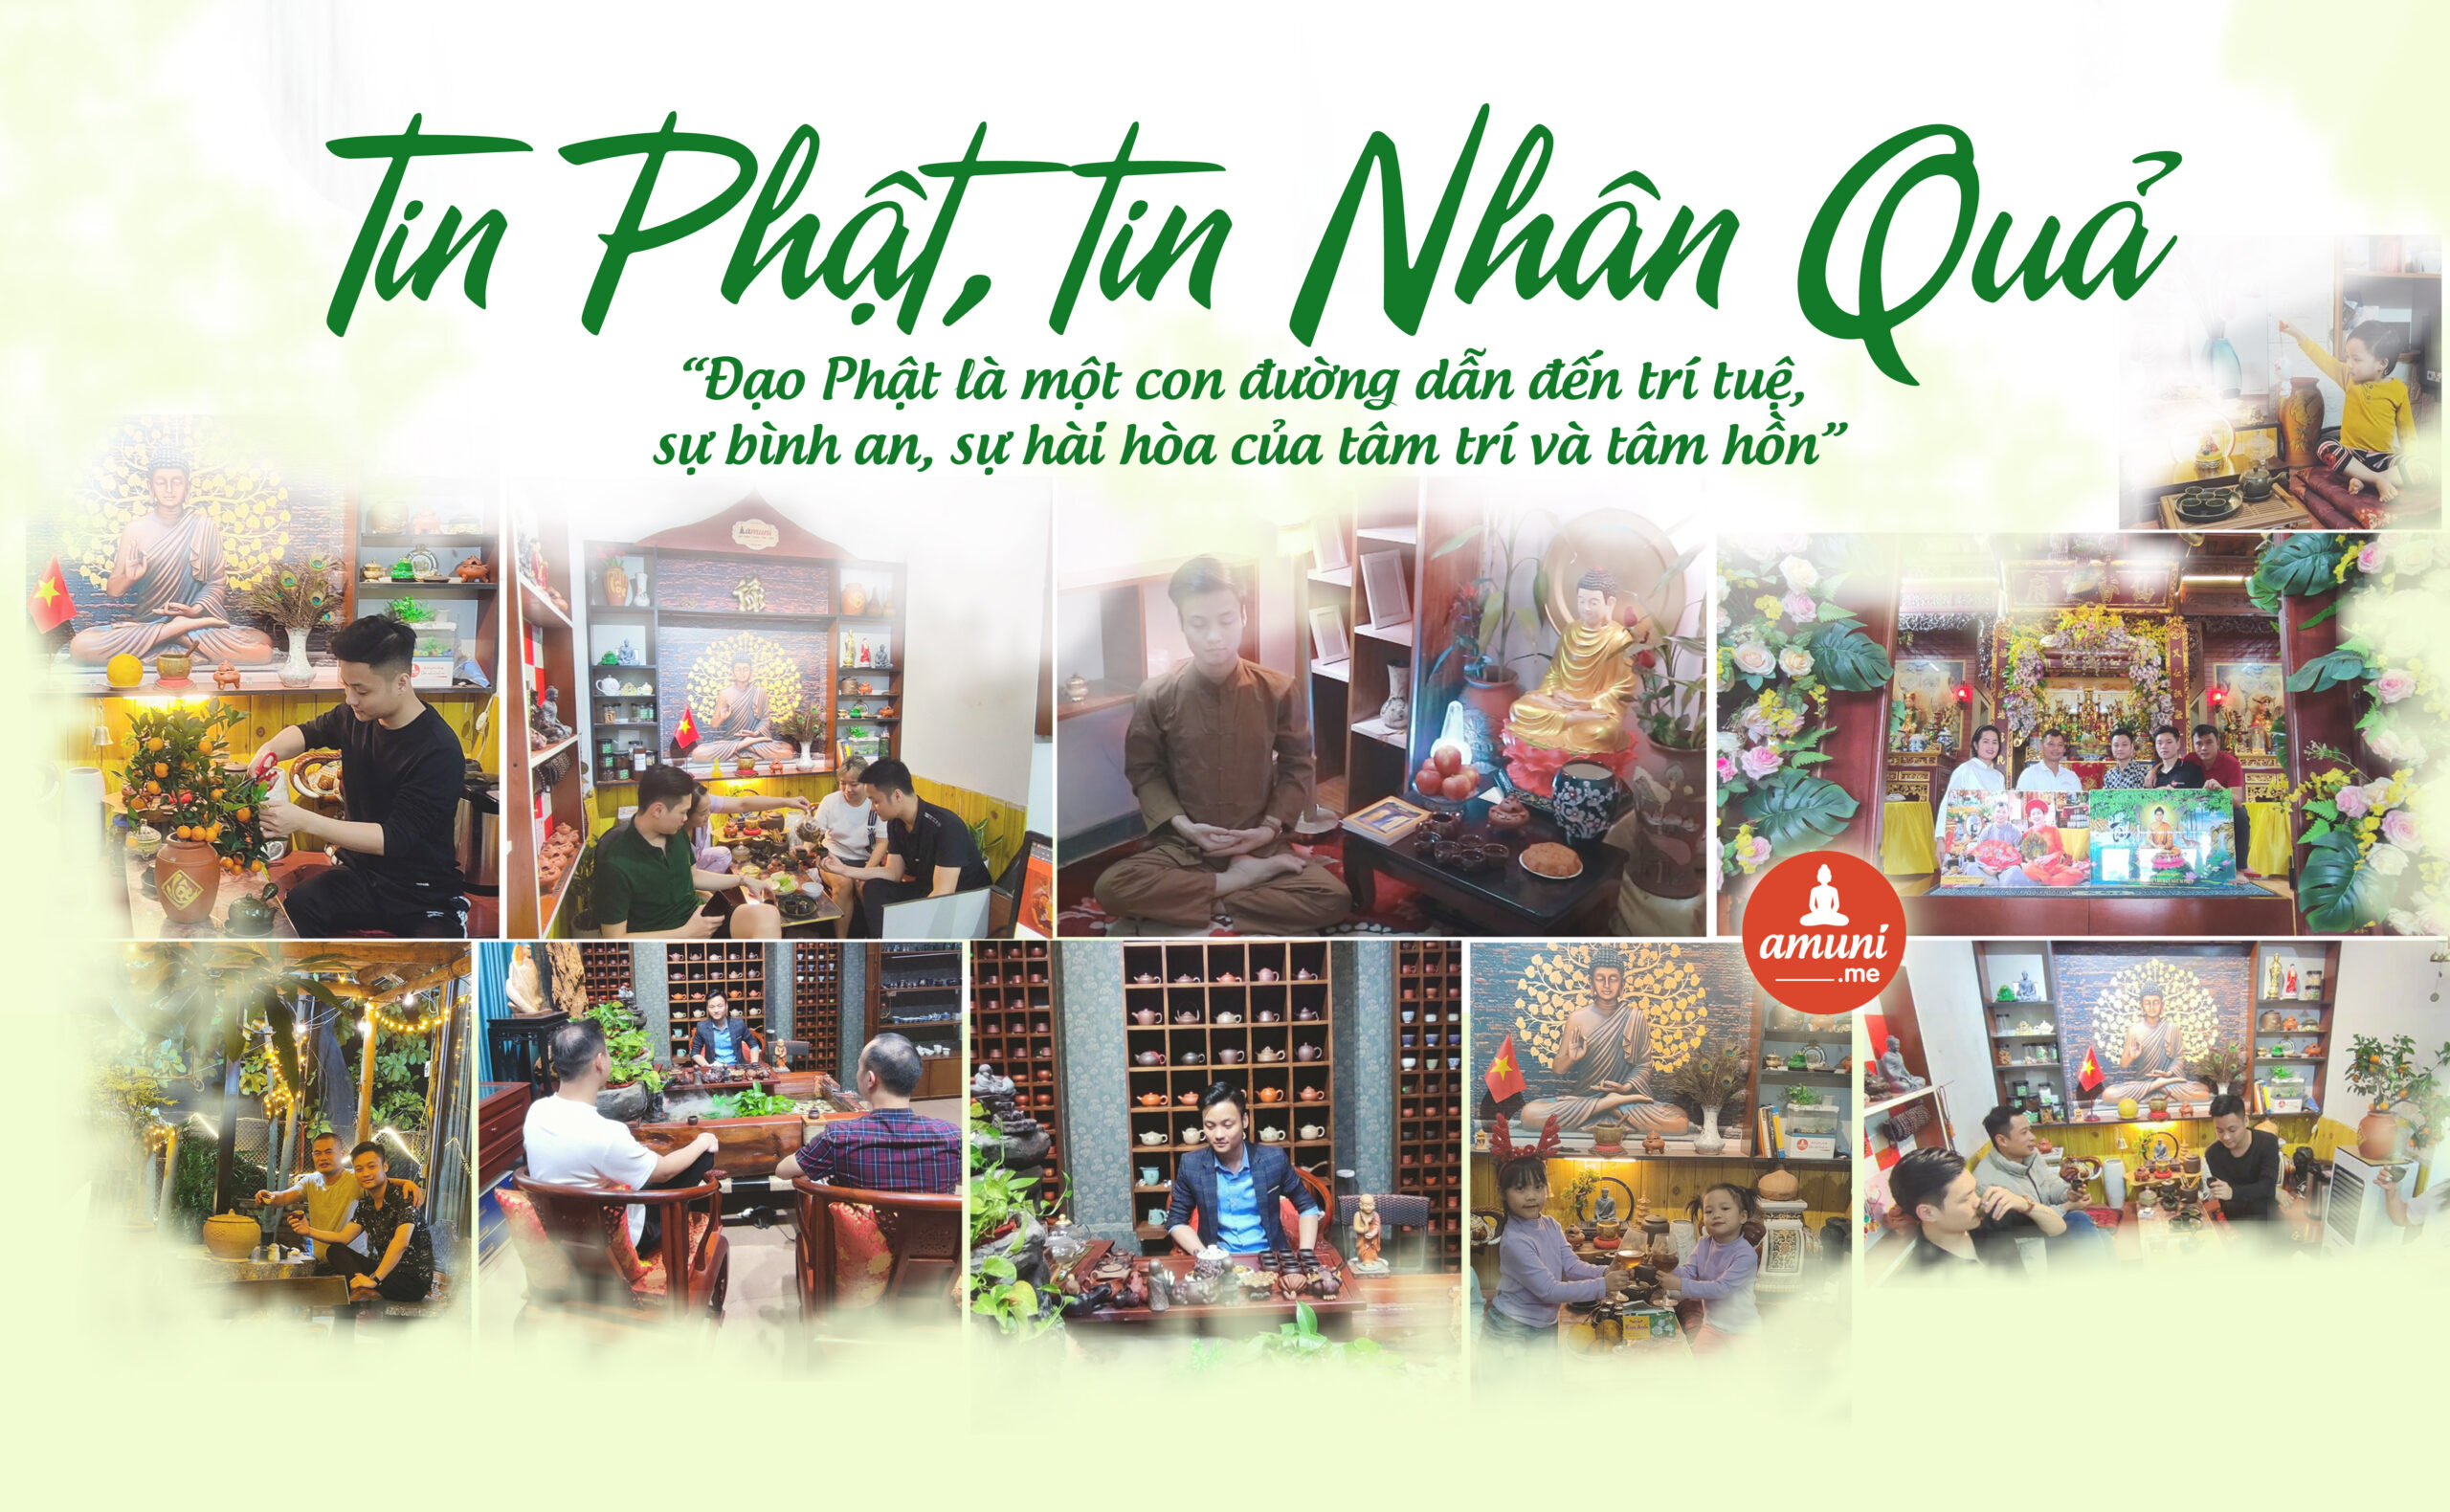 Gieo-duyen-phat-tang-anh1521-copy